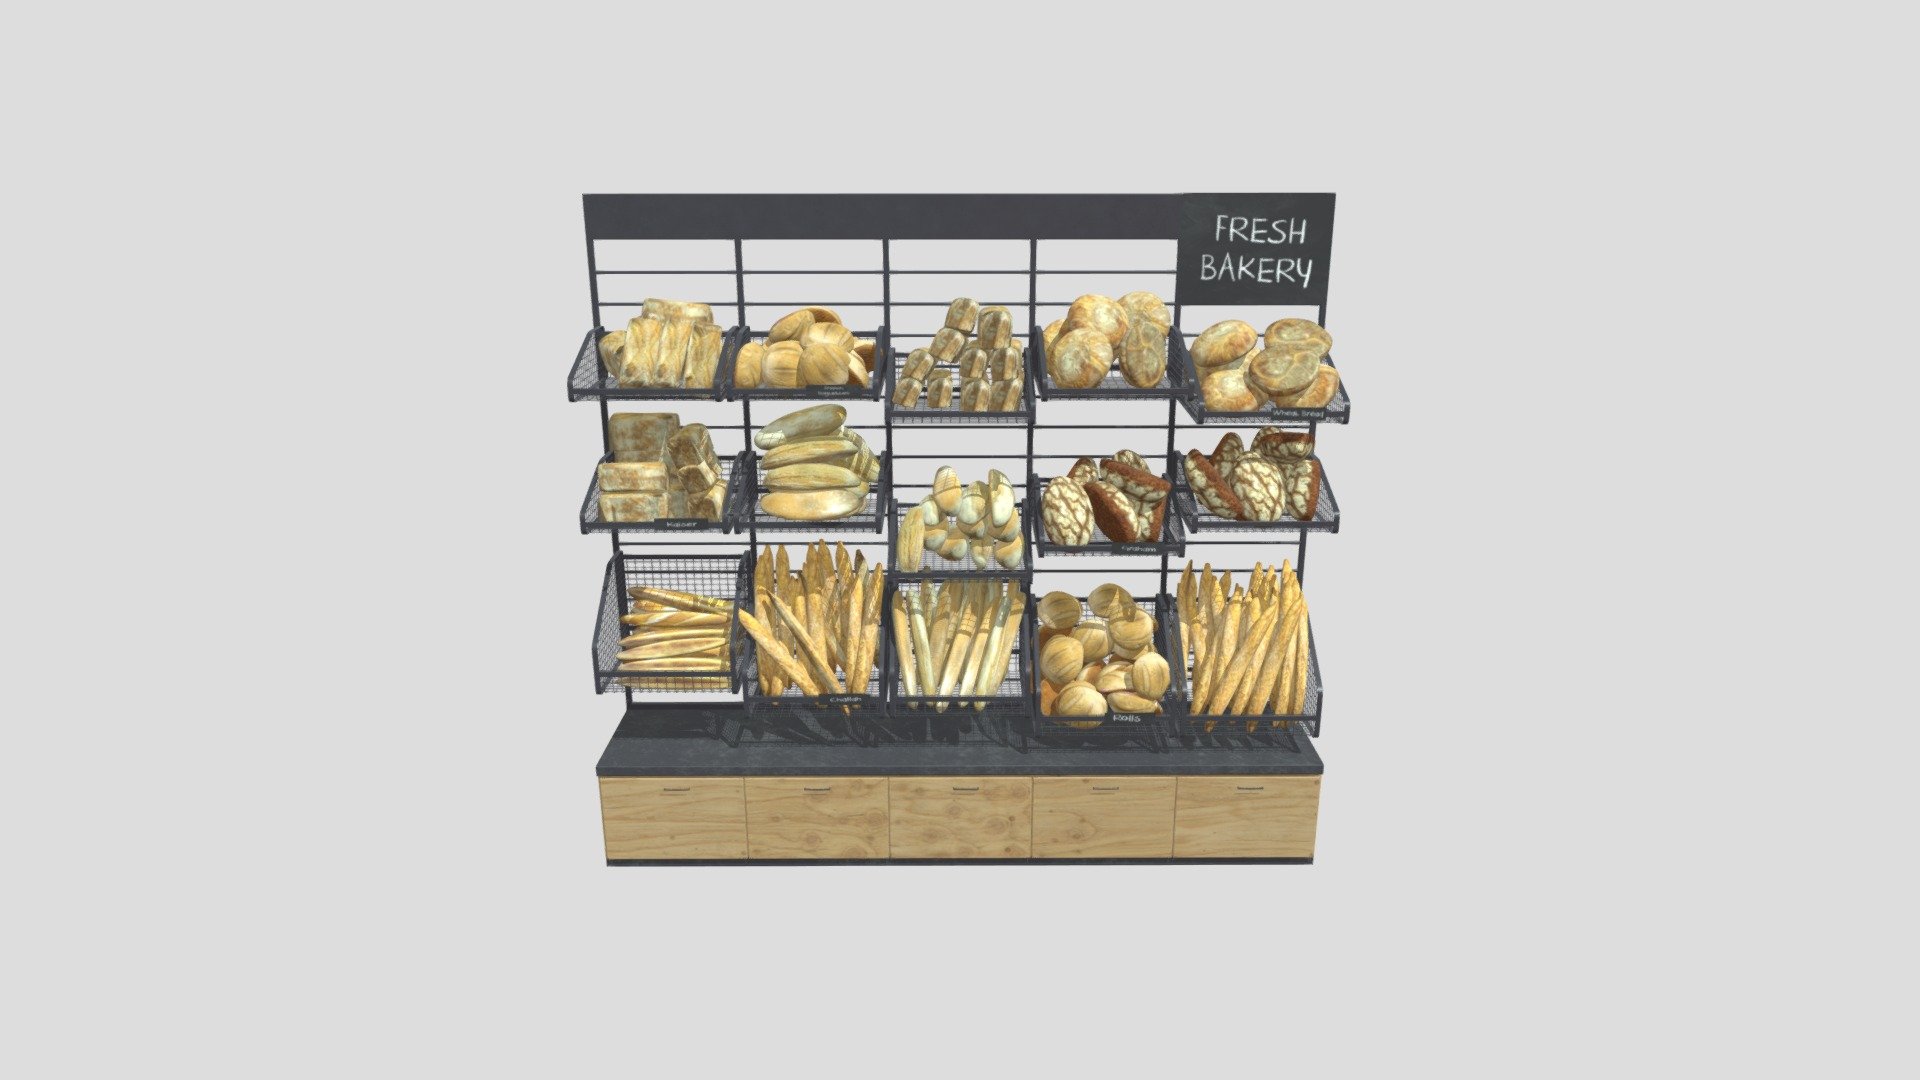 Highly detailed 3d models of&nbsp;store fixtures with all textures, shaders and materials. It is ready to use, just put it into your scene 3d model